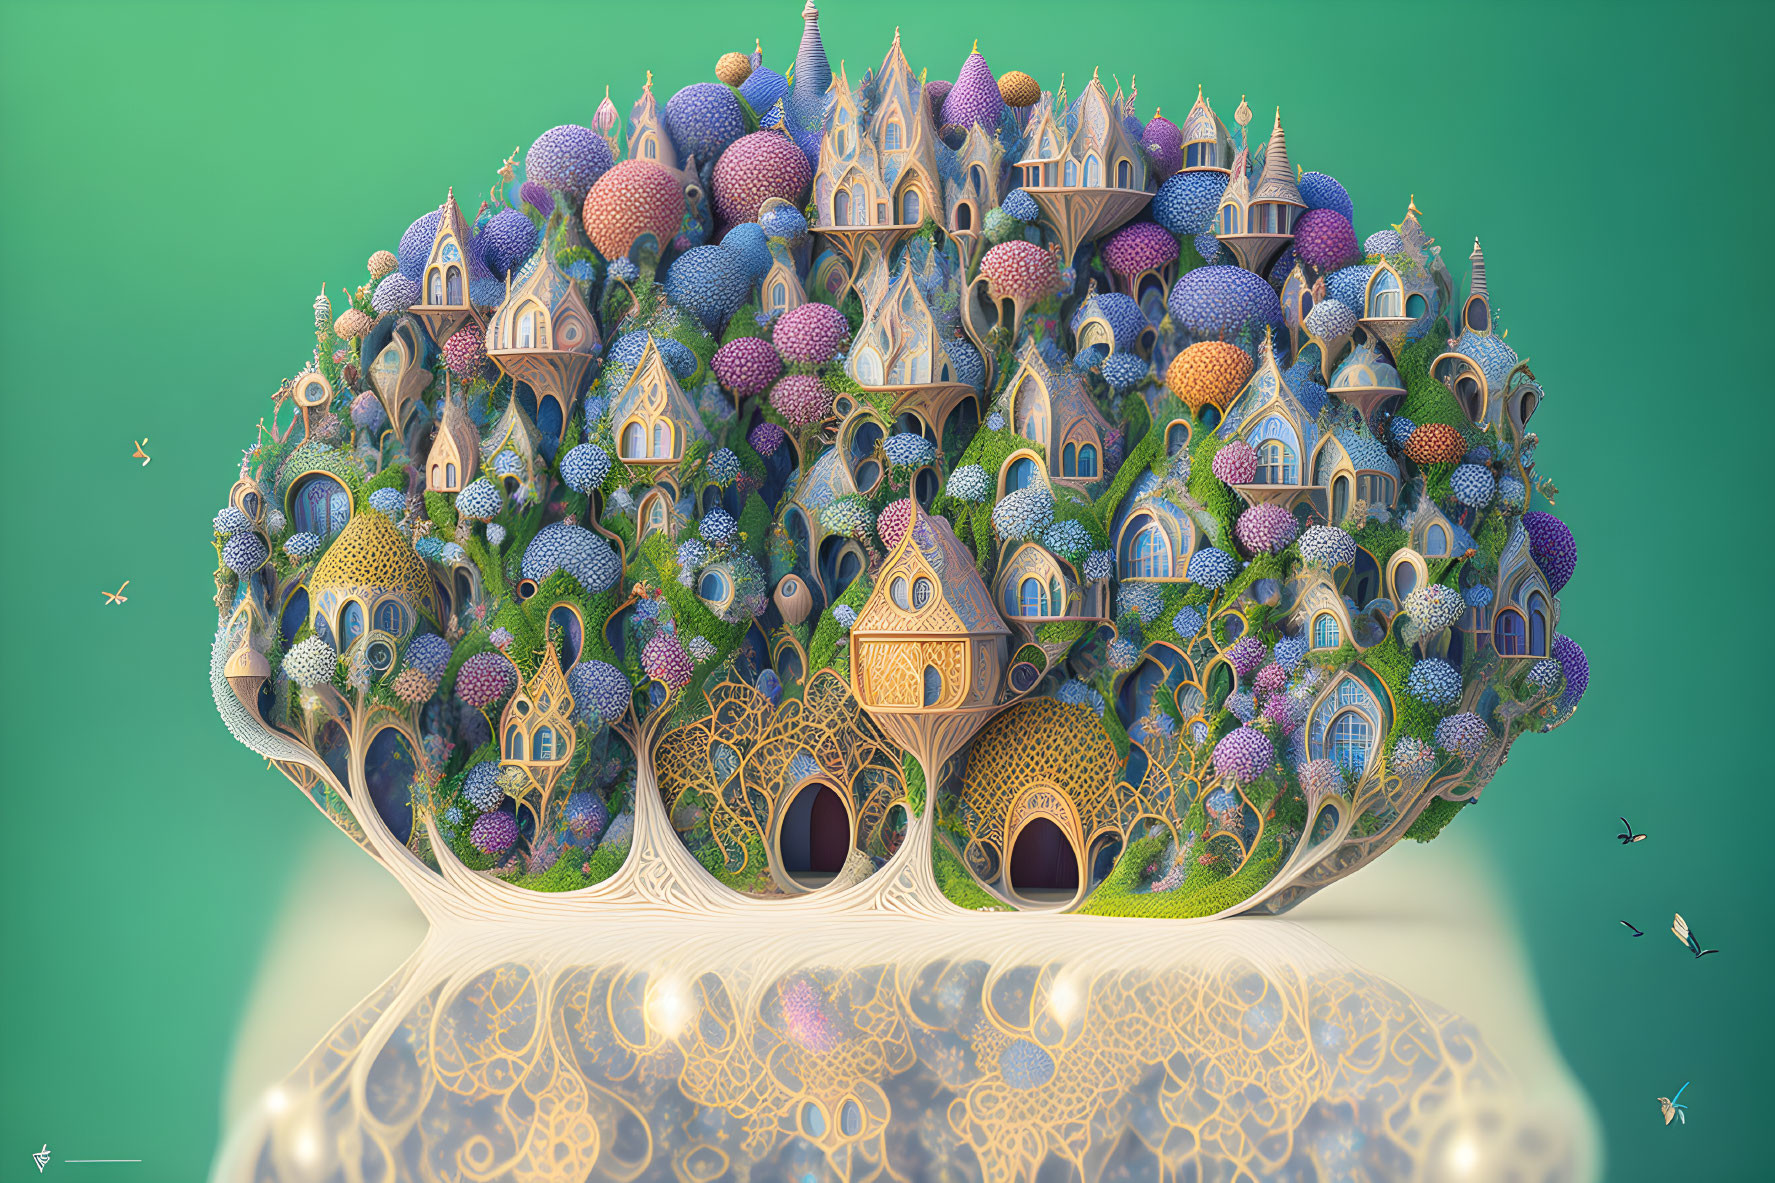 Colorful ornate buildings on floating island with tree-root-like structures